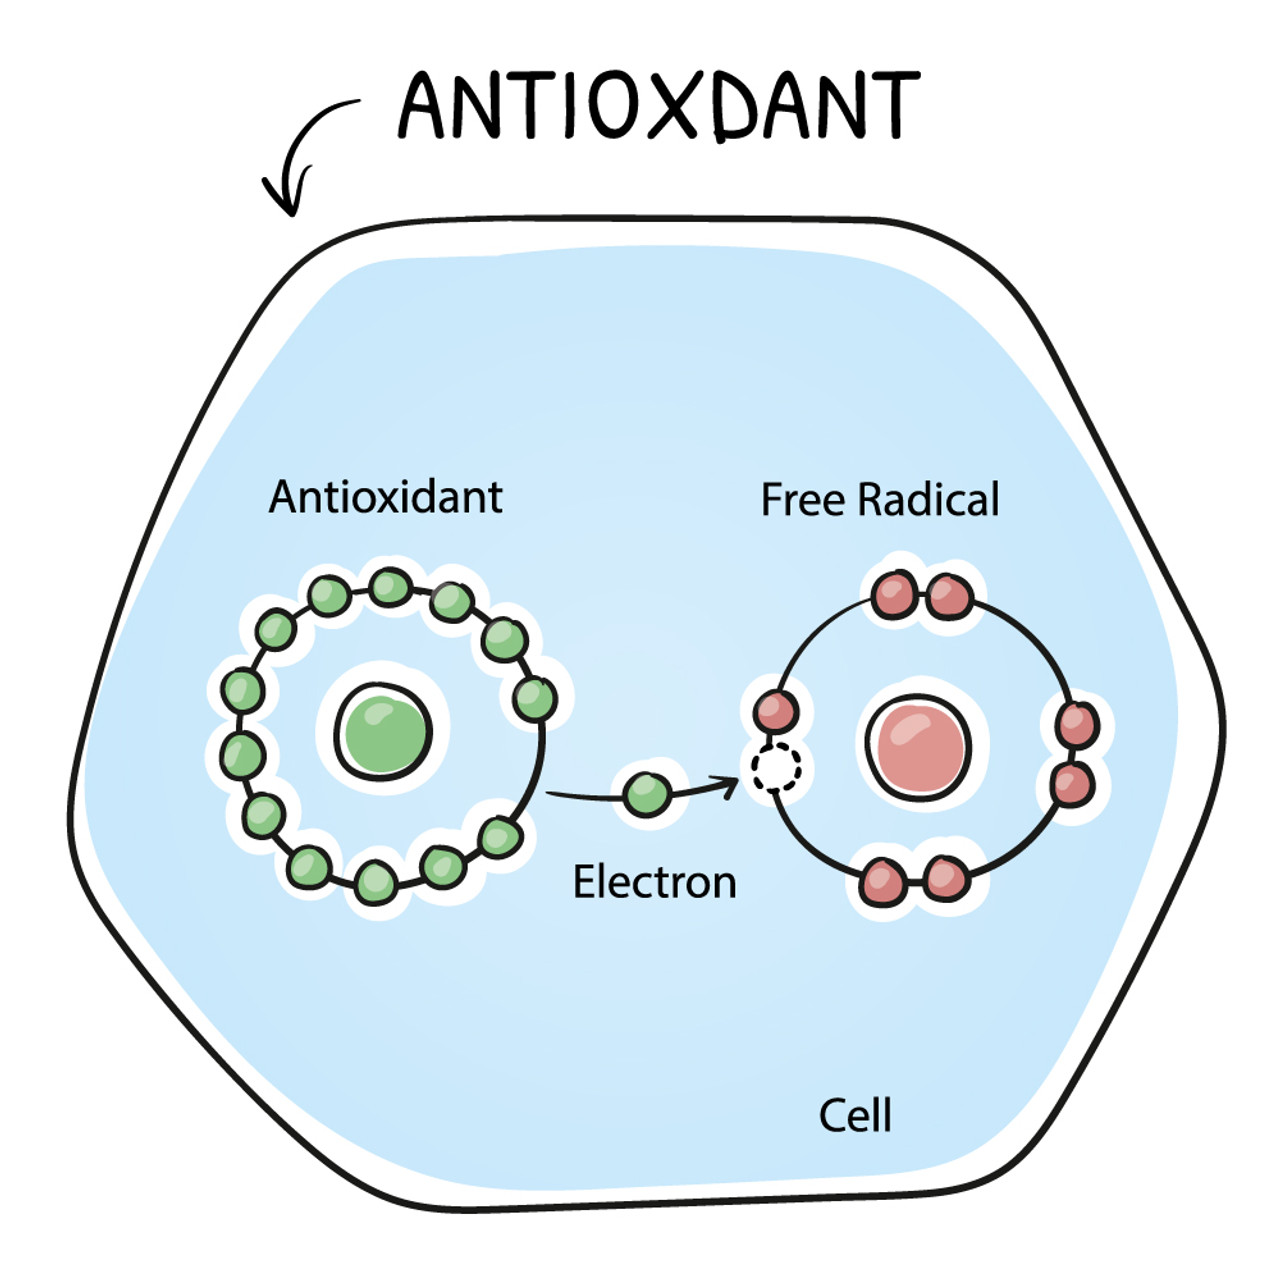 Antioxidants: What They Are & Why They're Important For Skin